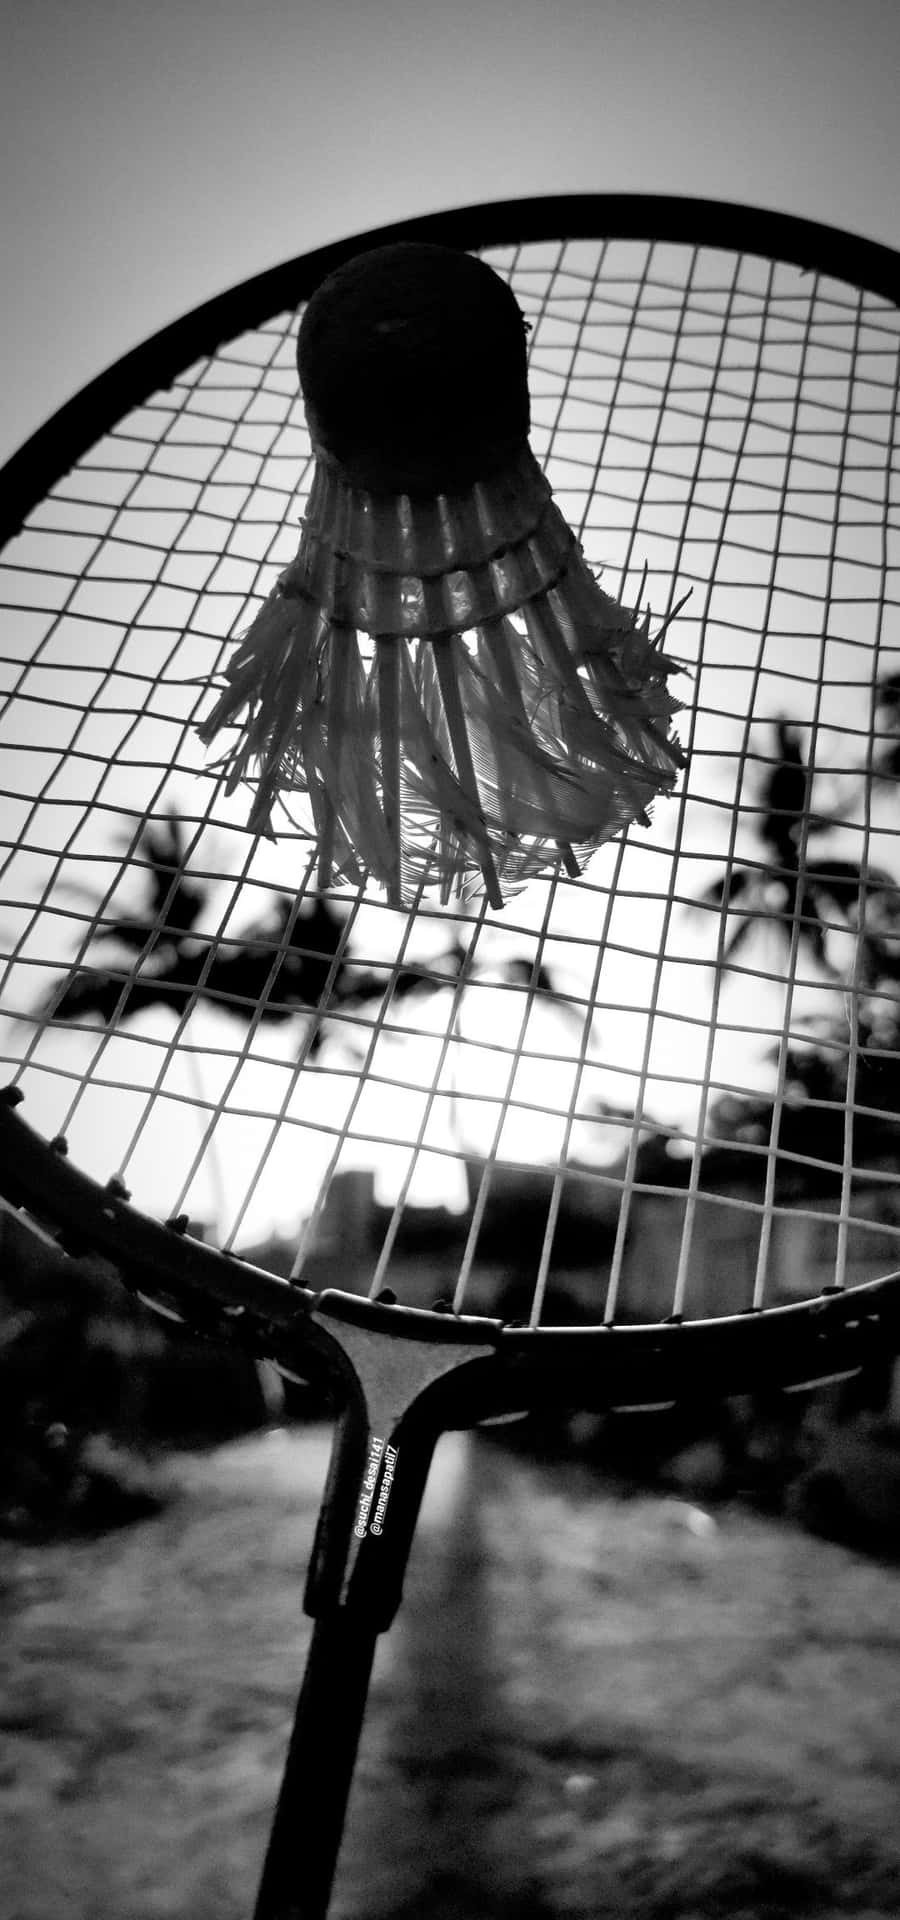 Badminton Racket In Black And White